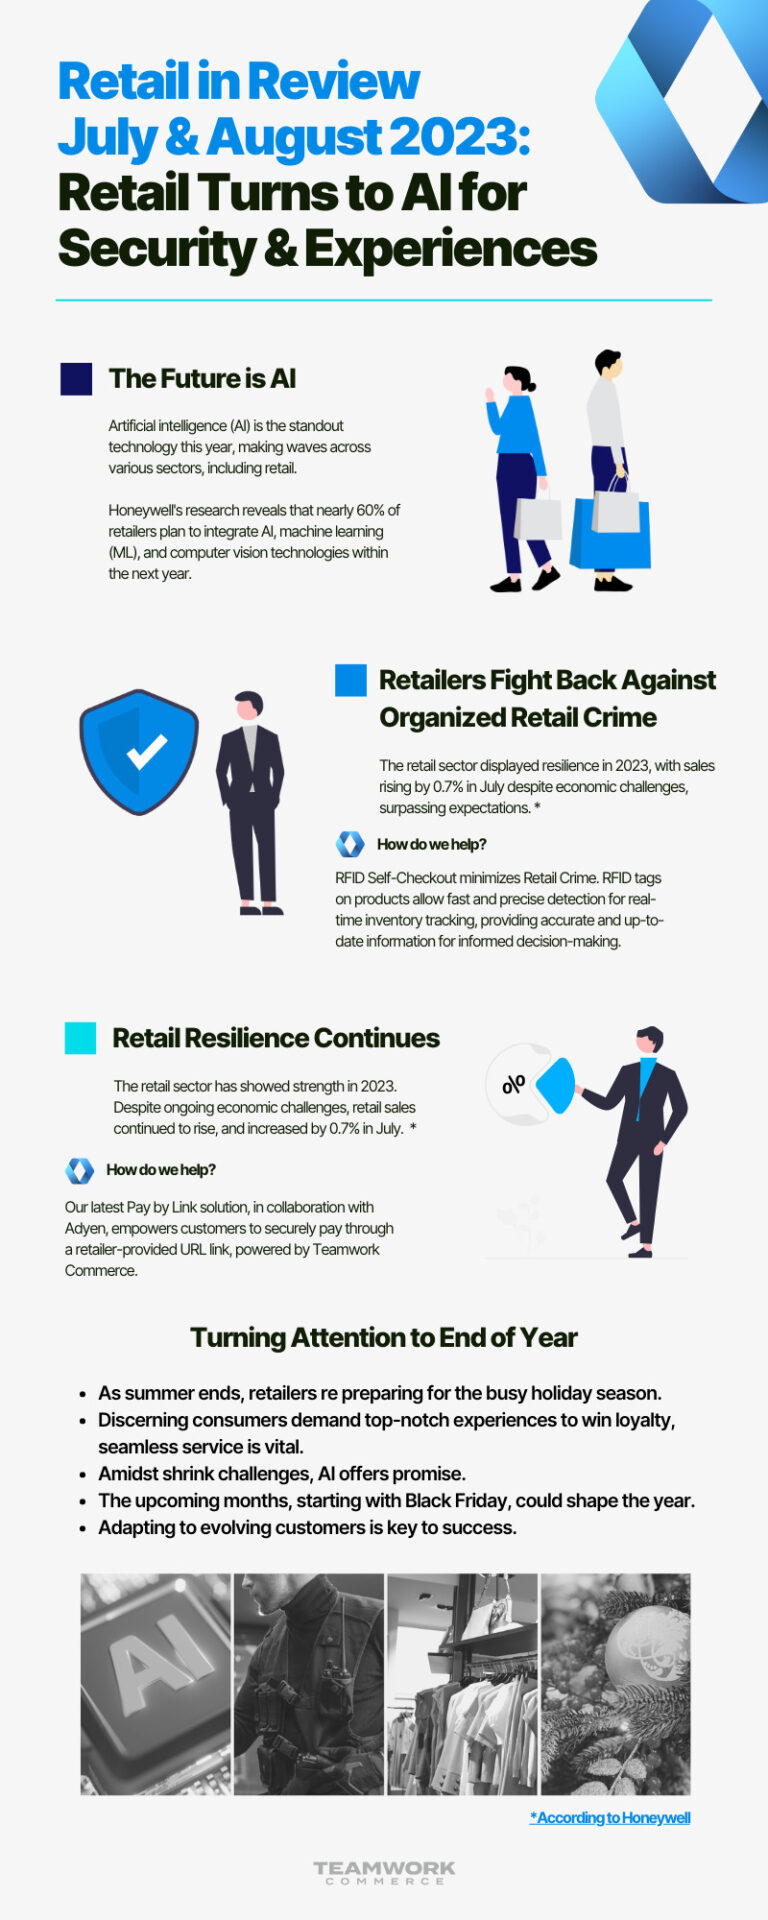 Retail in Review 
July & August 2023:
Retail Turns to AI for Security & Experiences